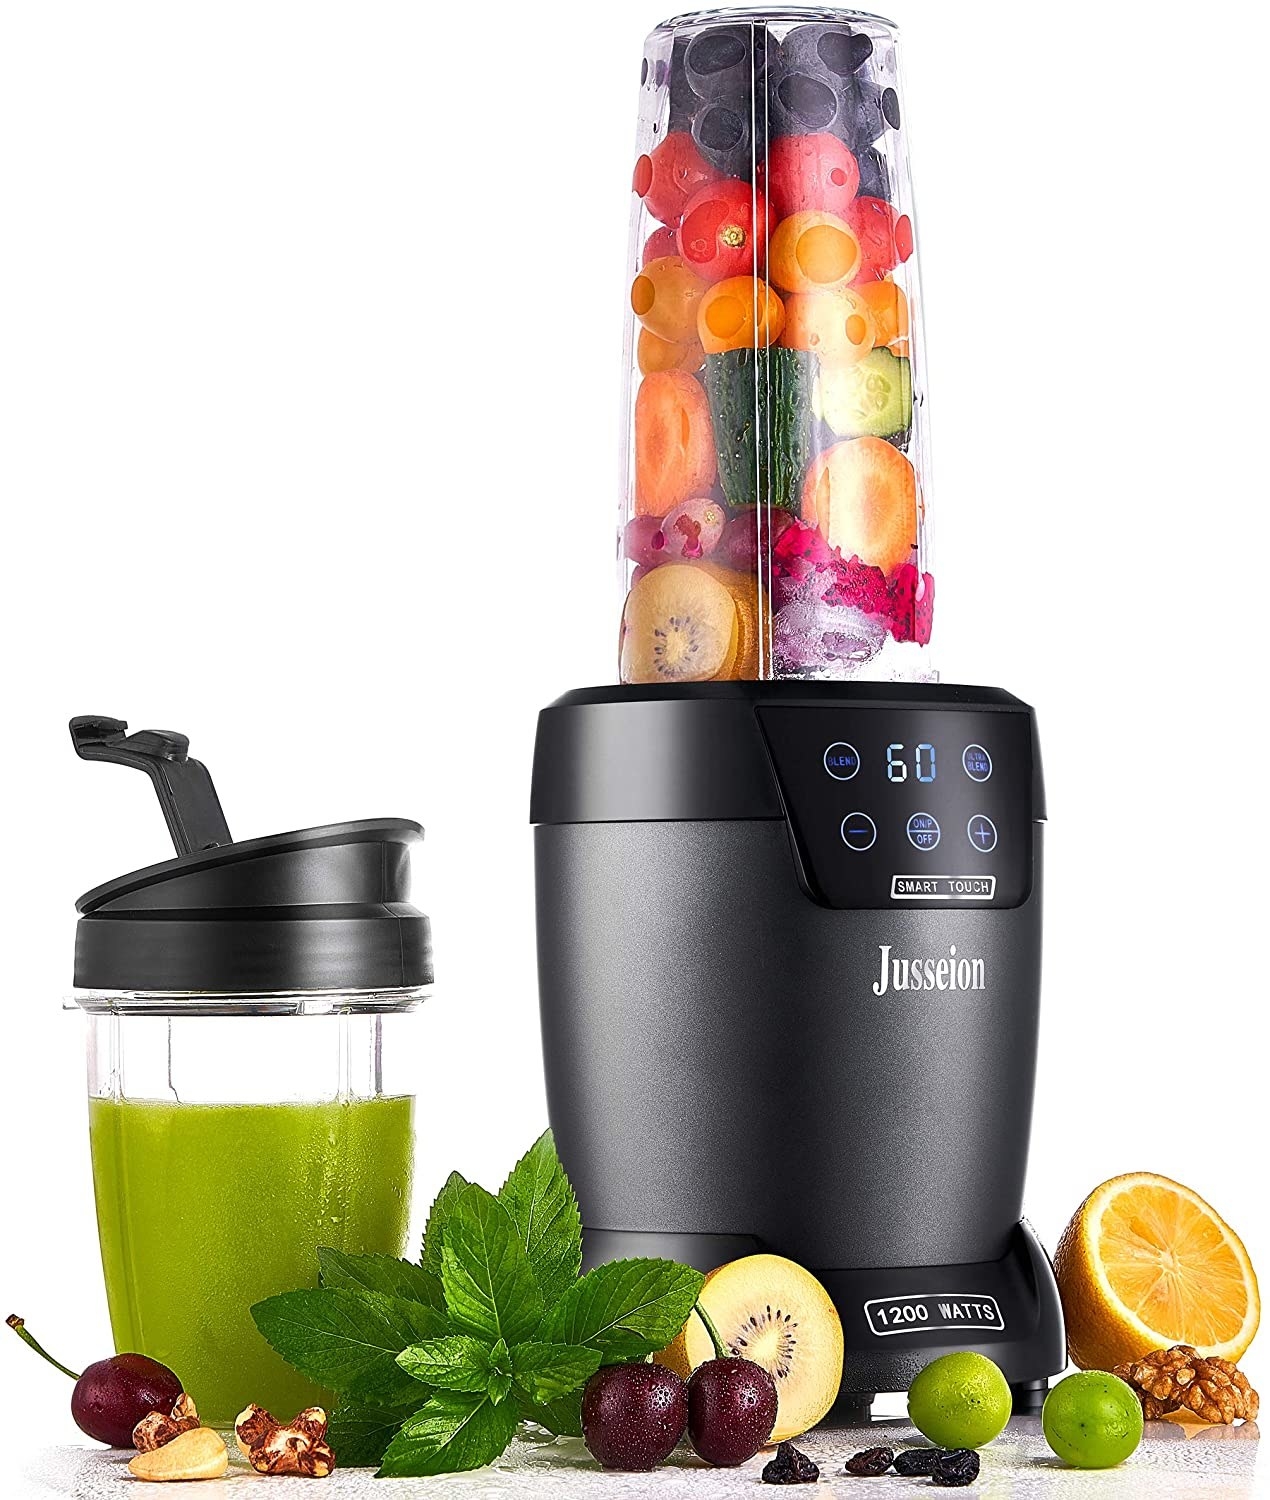 A picture of the blender with fruits, vegetables, and a green smoothie surrounding it